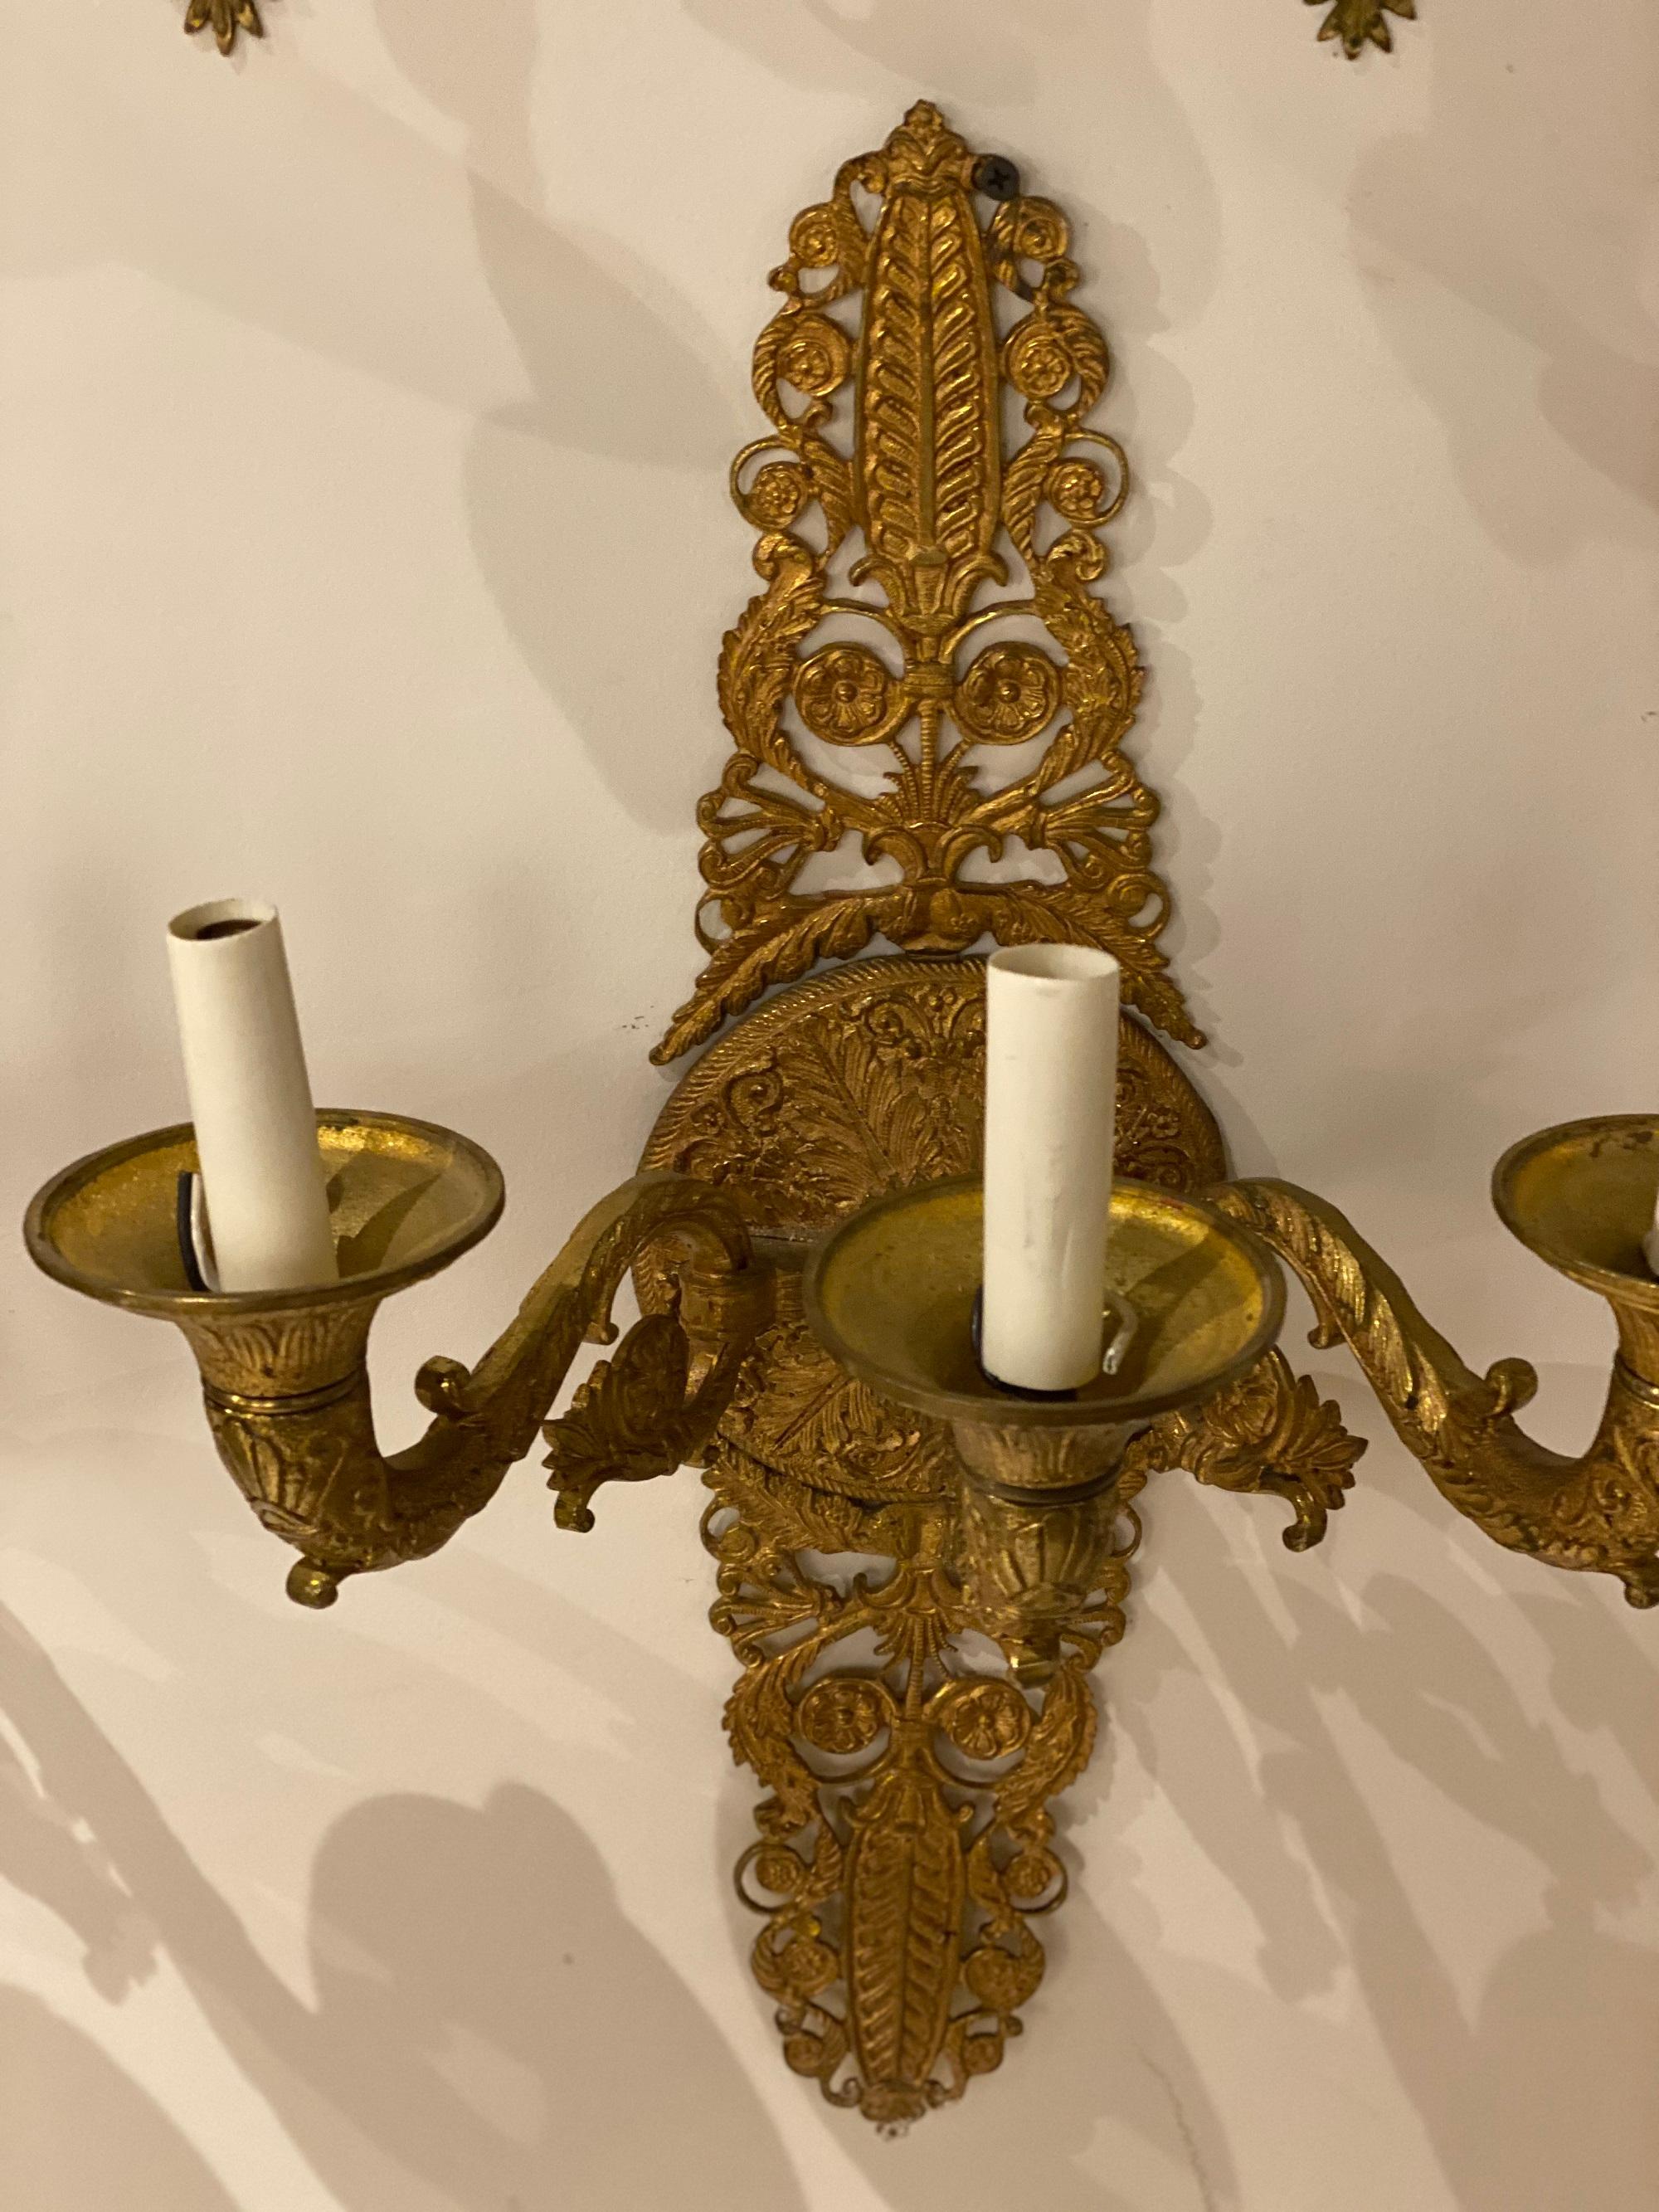 1920s French Empire Sconces with 3 lights In Good Condition For Sale In New York, NY